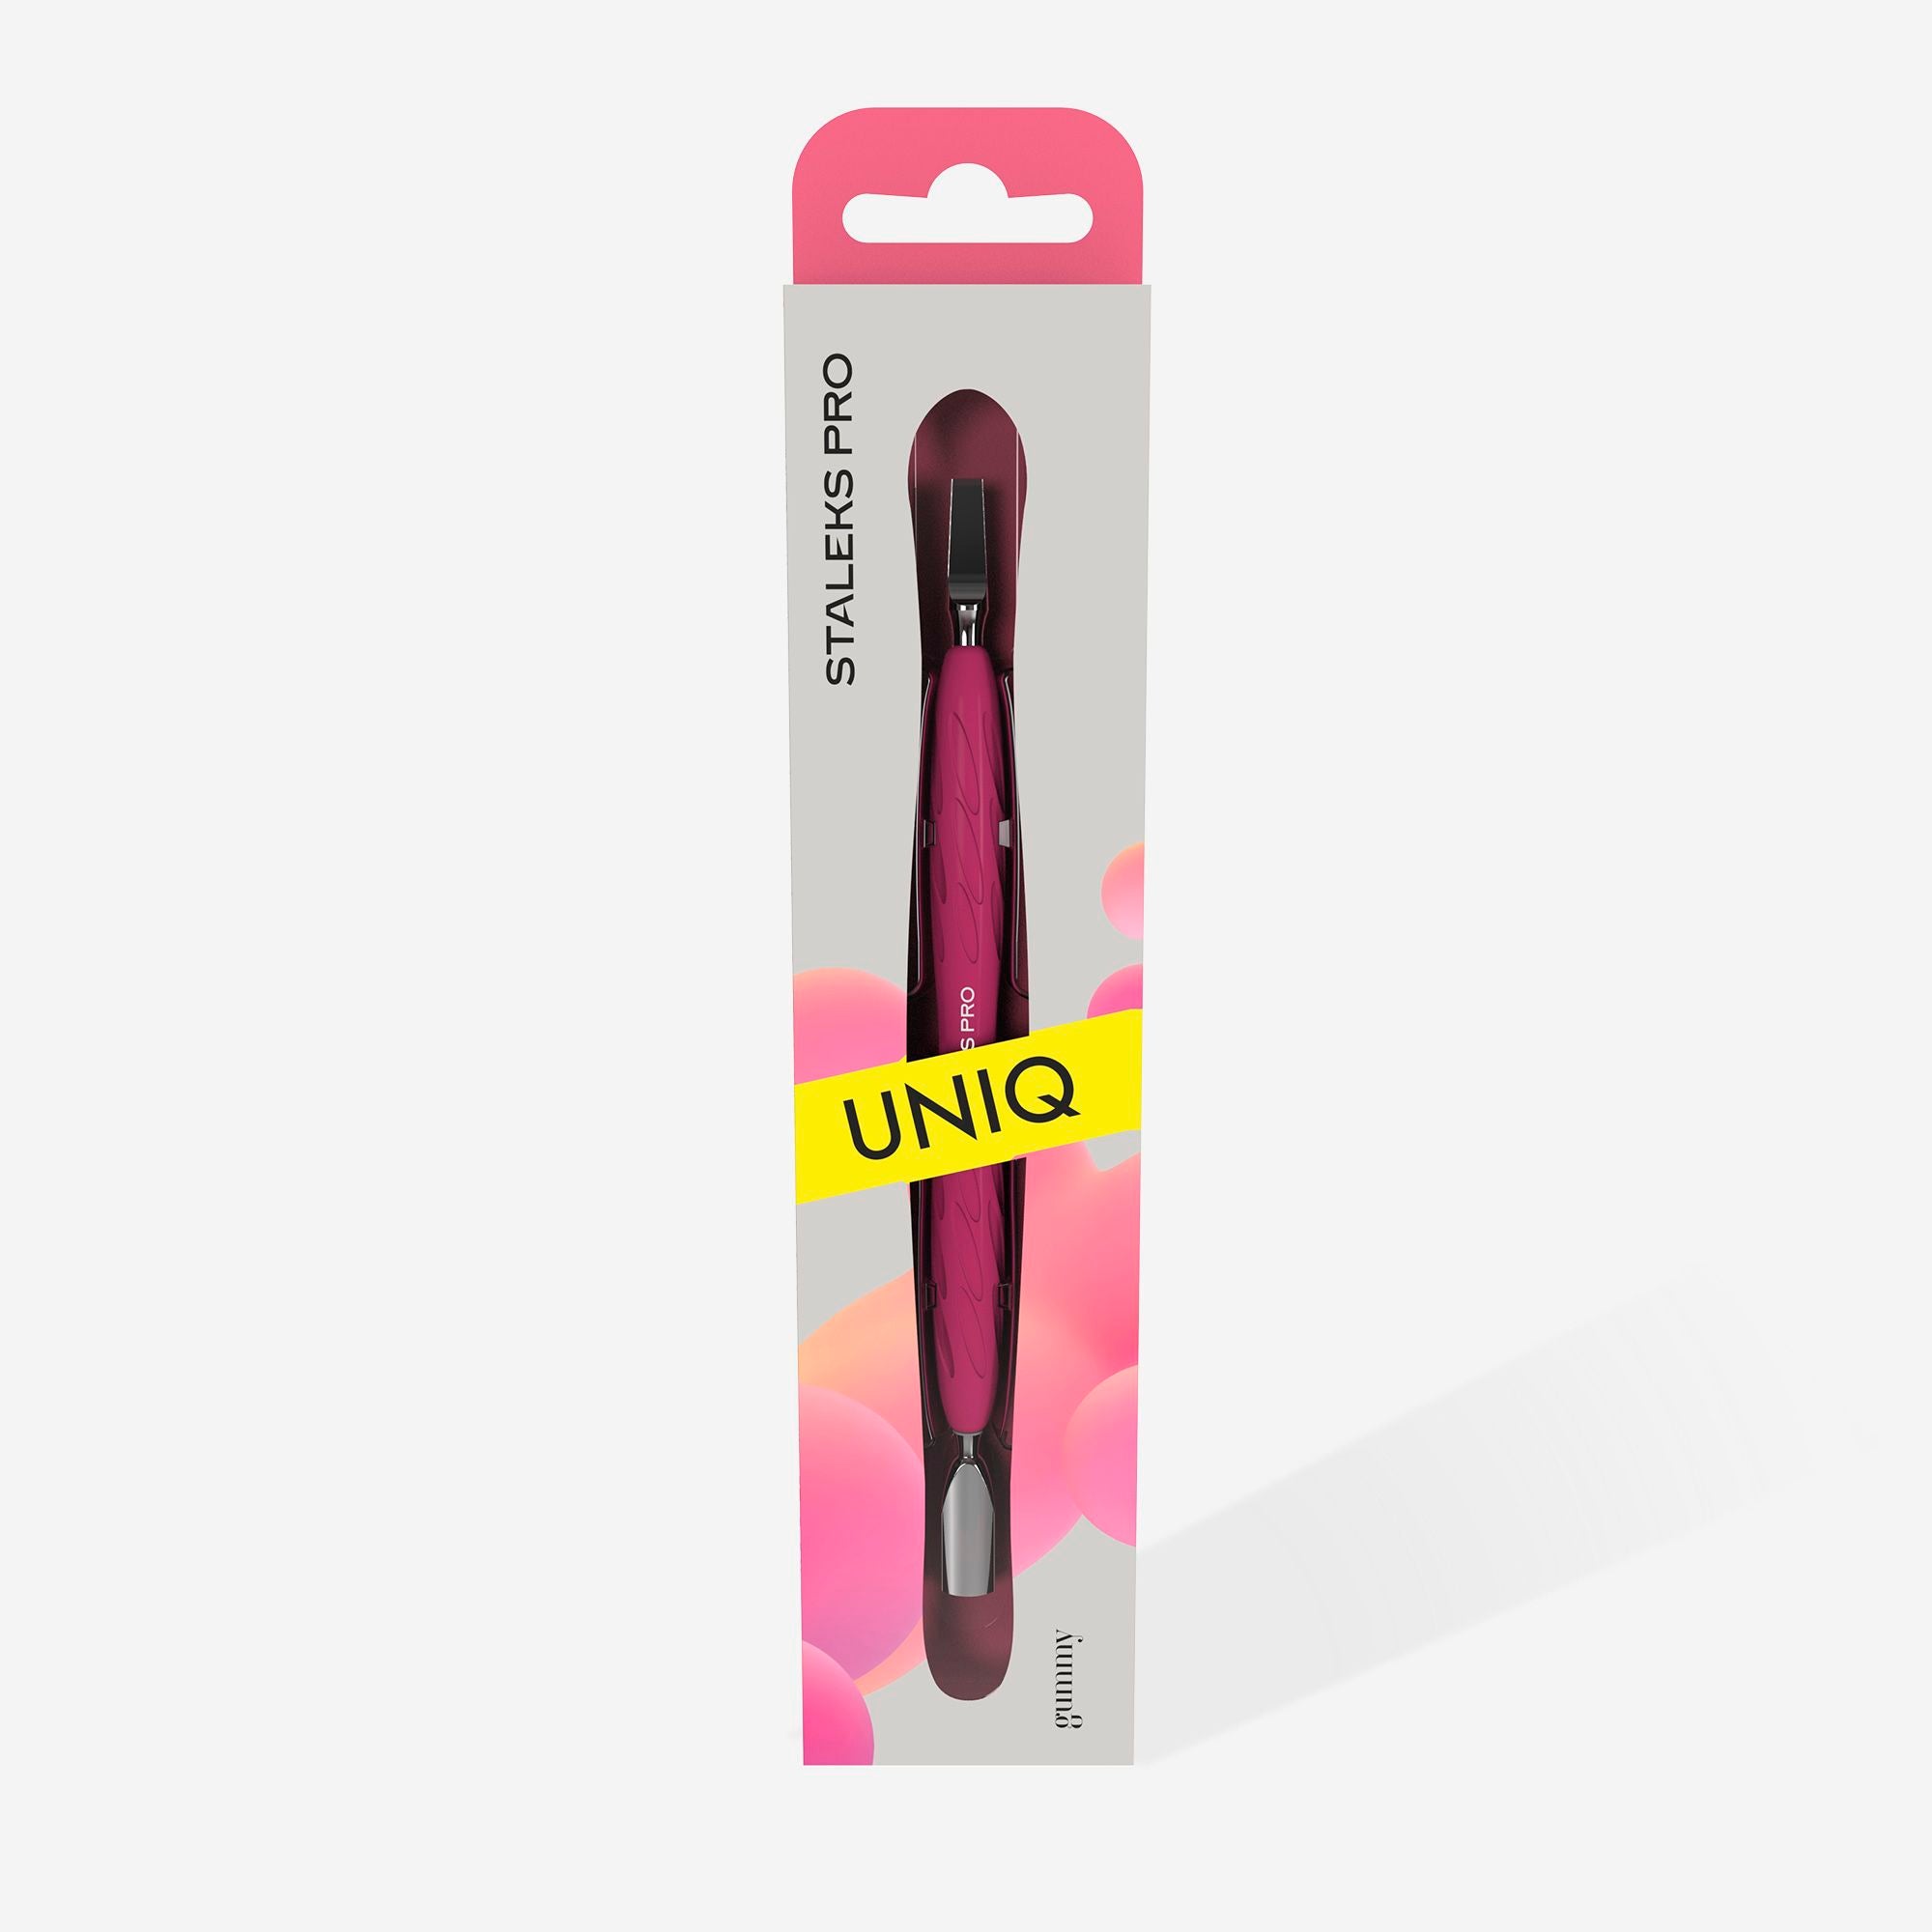 STALEKS Manicure pusher with silicone handle “Gummy” UNIQ 10 TYPE 5 (narrow rounded pusher + wide blade) PQ-10/5